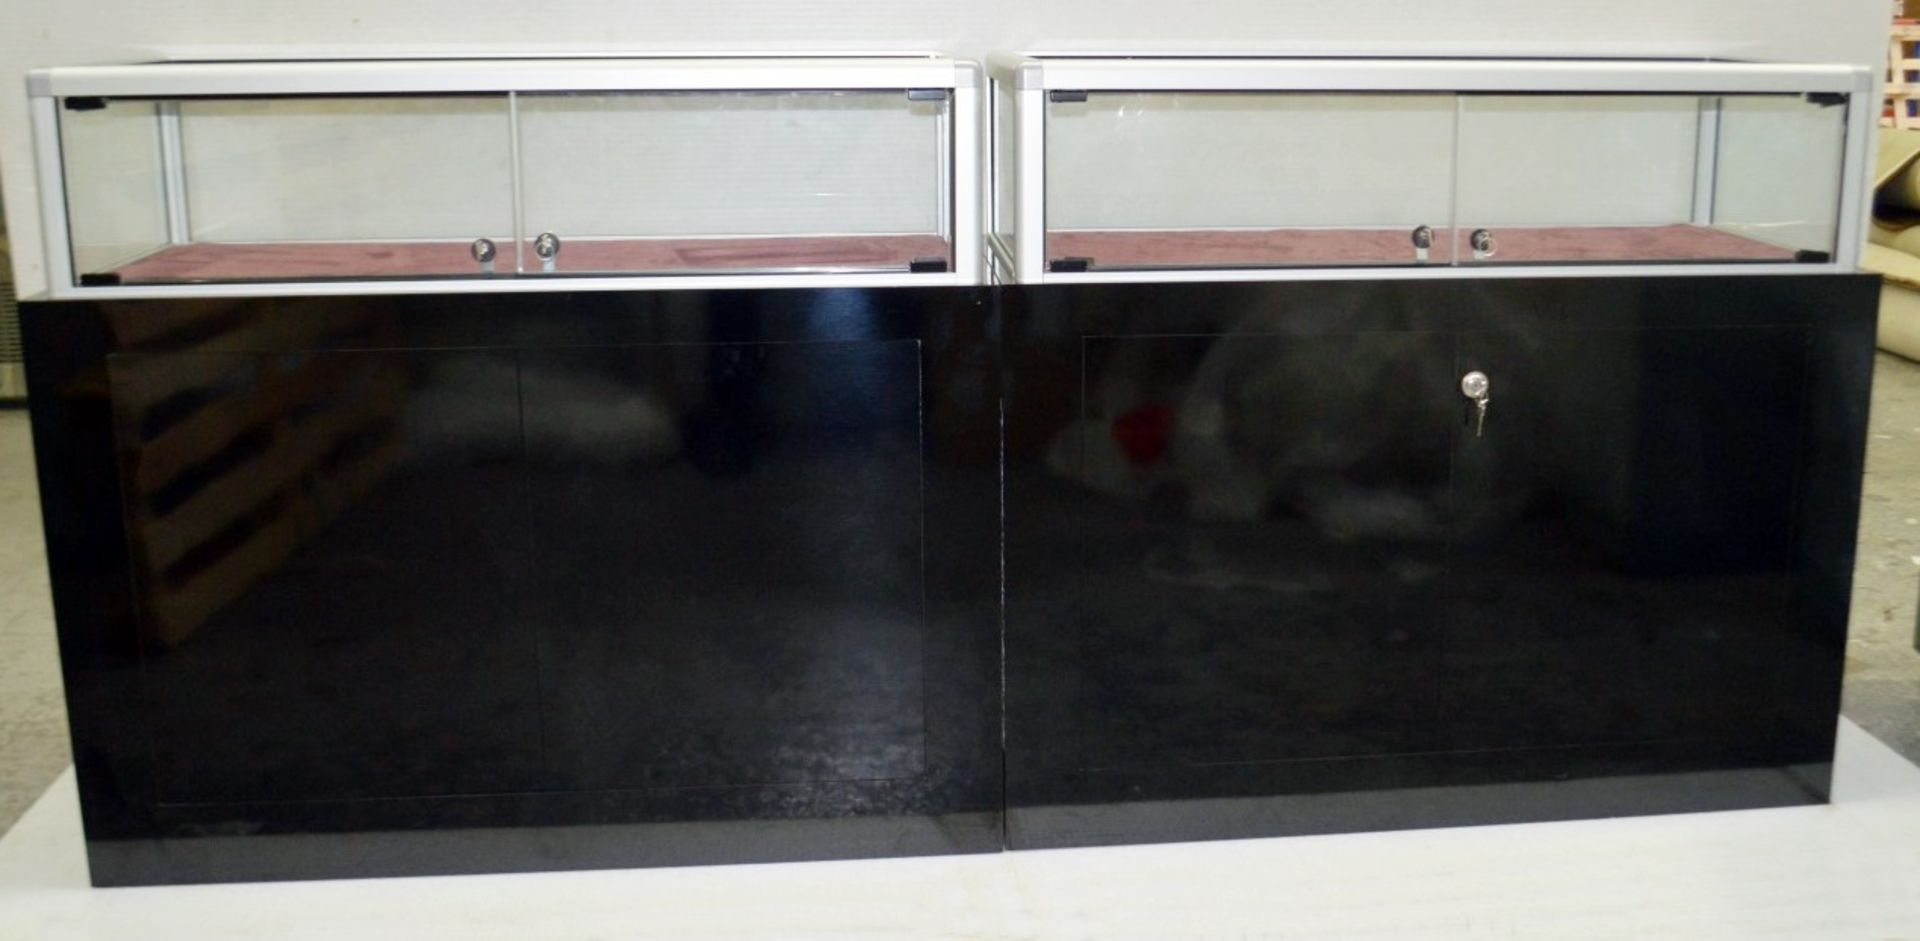 Pair Of Retail Counters With Lockable Display Cabinets And Undercounter Storage - Image 2 of 9